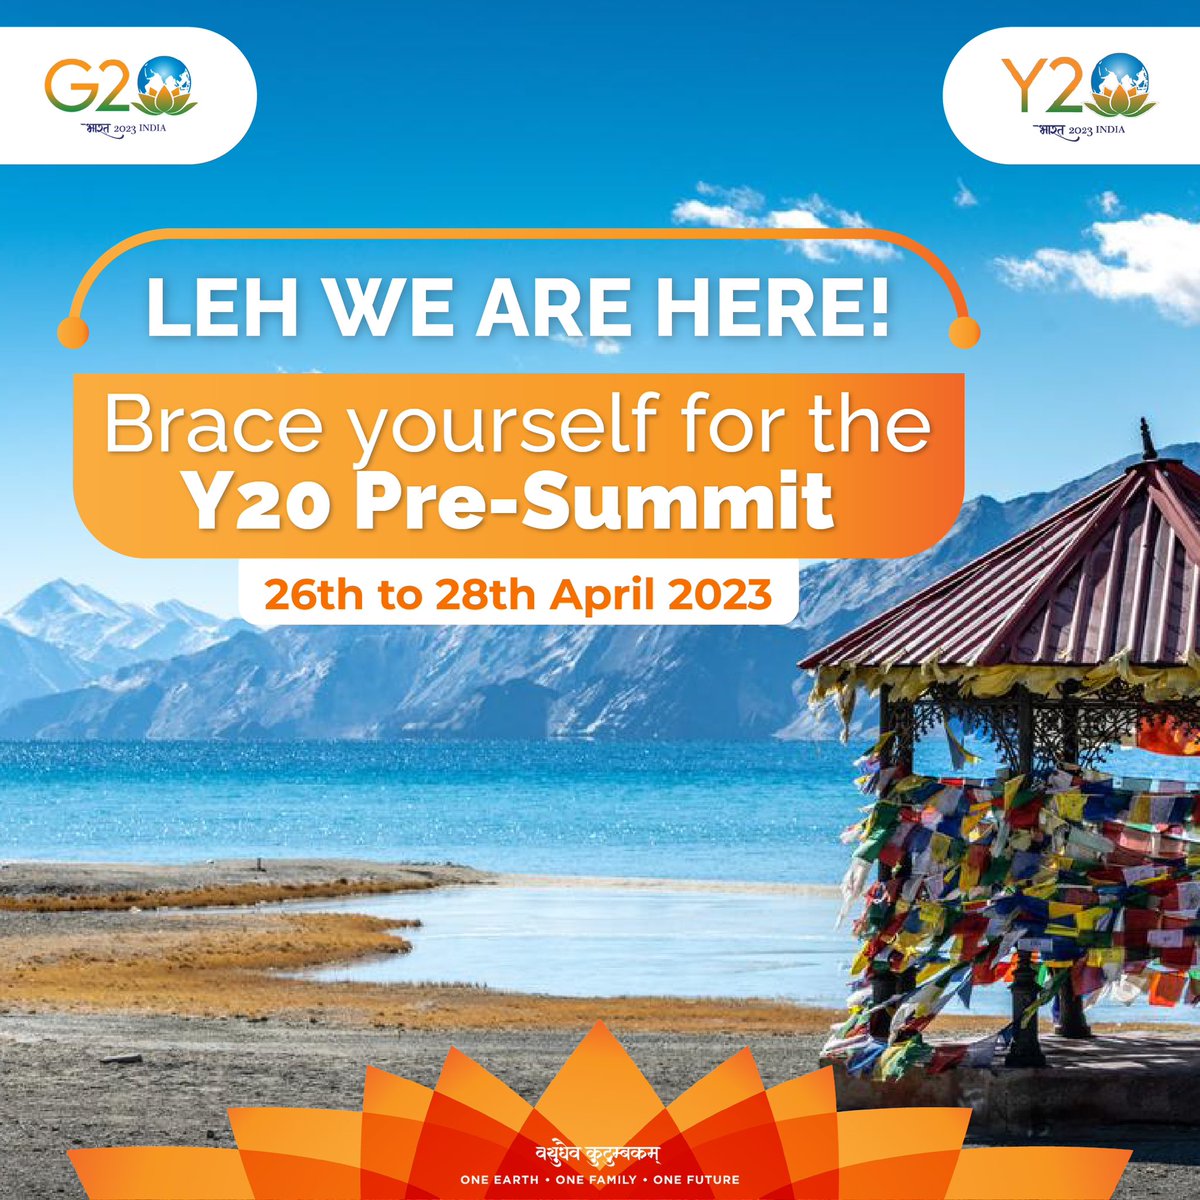 The serene beauty of Leh provides the perfect backdrop for the #Y20 Pre-Summit, as delegates from around the world gather to collaborate and drive positive change for youth empowerment.

#Y20atLeh #GlobalYouthVoice #Y20India #G20India